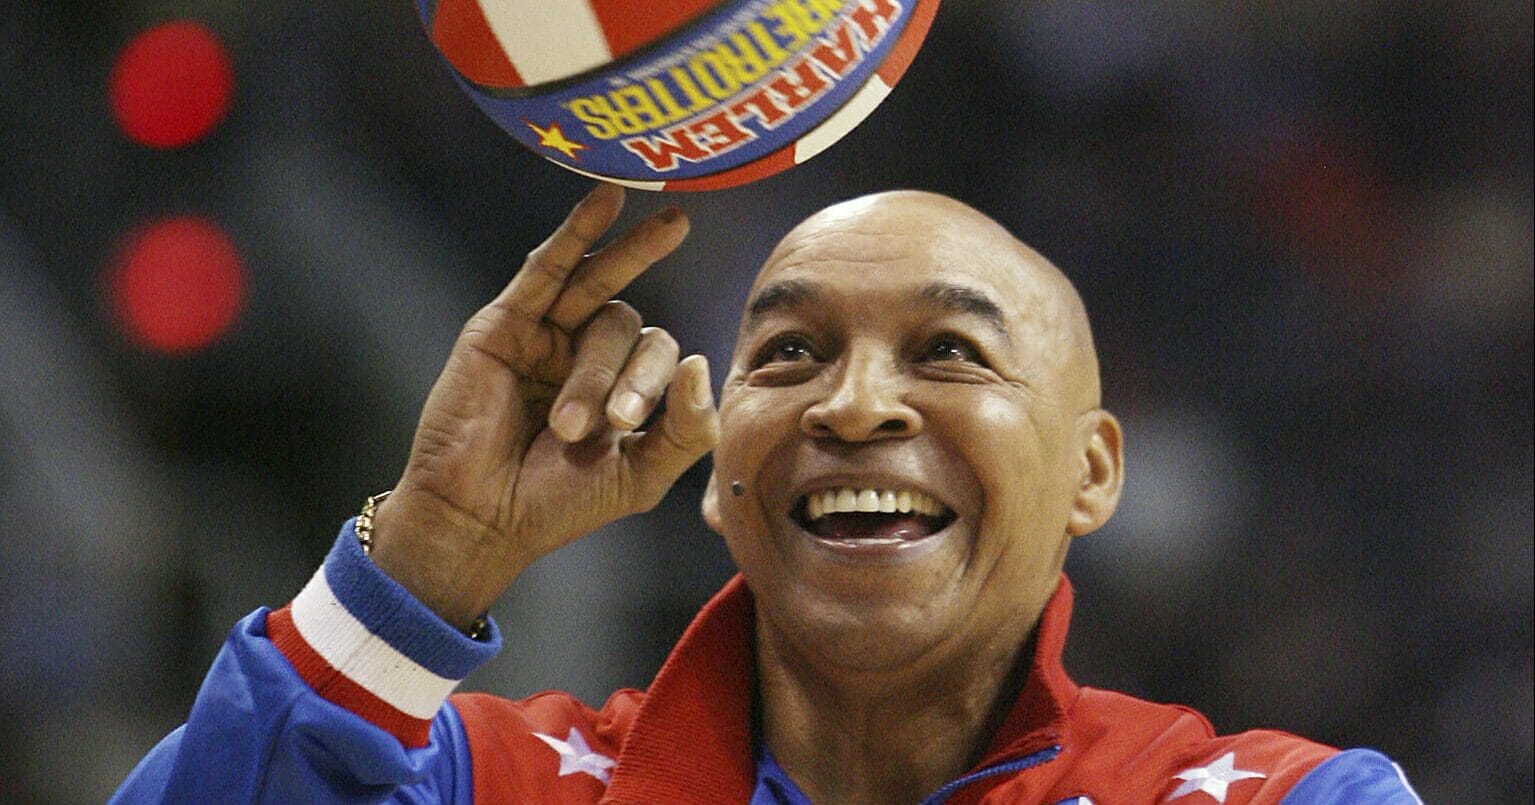 The Harlem Globetrotters' Fred "Curly" Neal performs during a timeout in the second quarter in an NBA game between the Indiana Pacers and the Phoenix Suns on Jan. 9, 2008, in Phoenix.